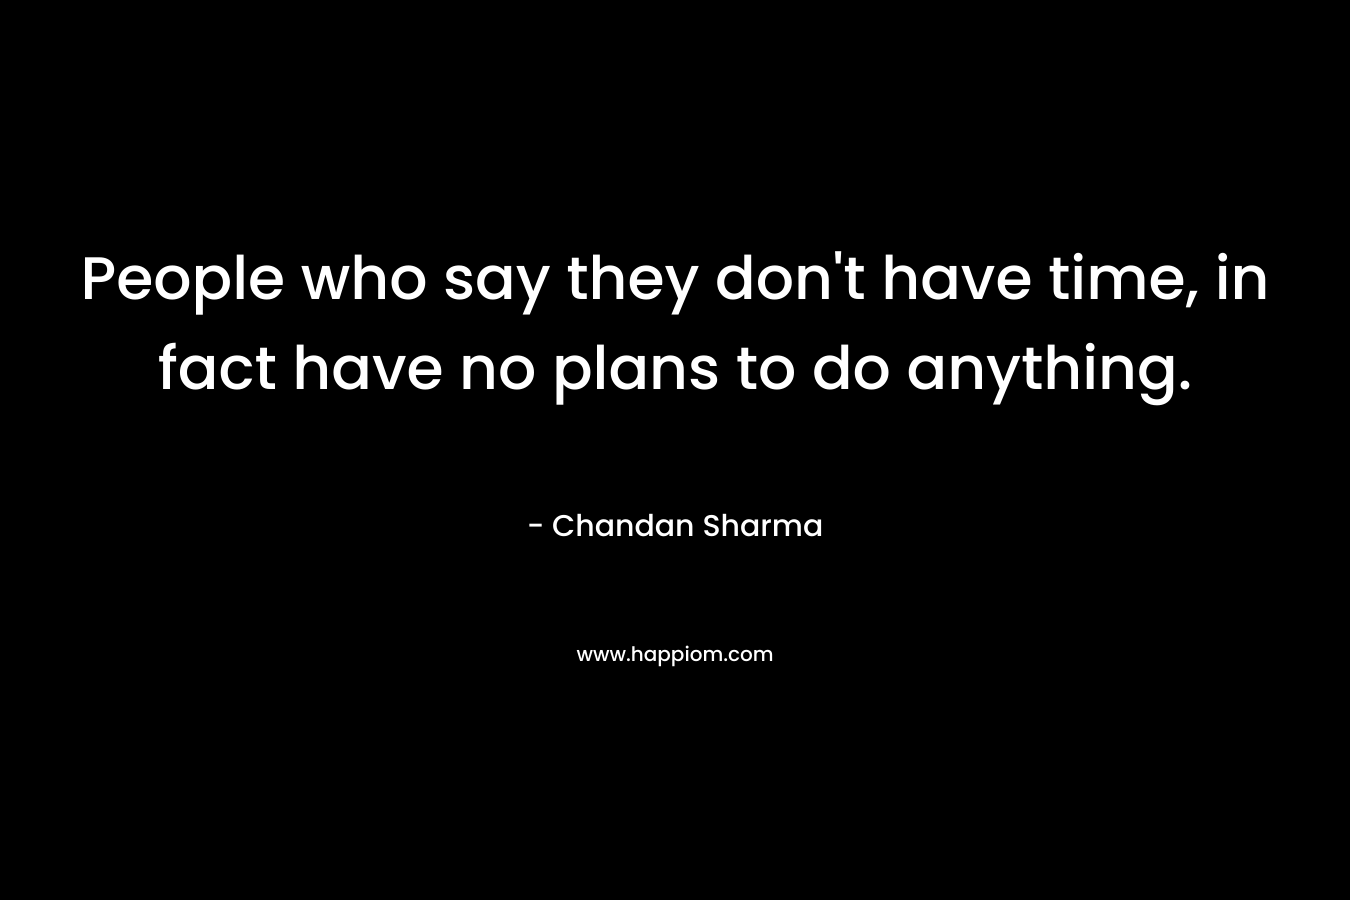 People who say they don’t have time, in fact have no plans to do anything. – Chandan Sharma